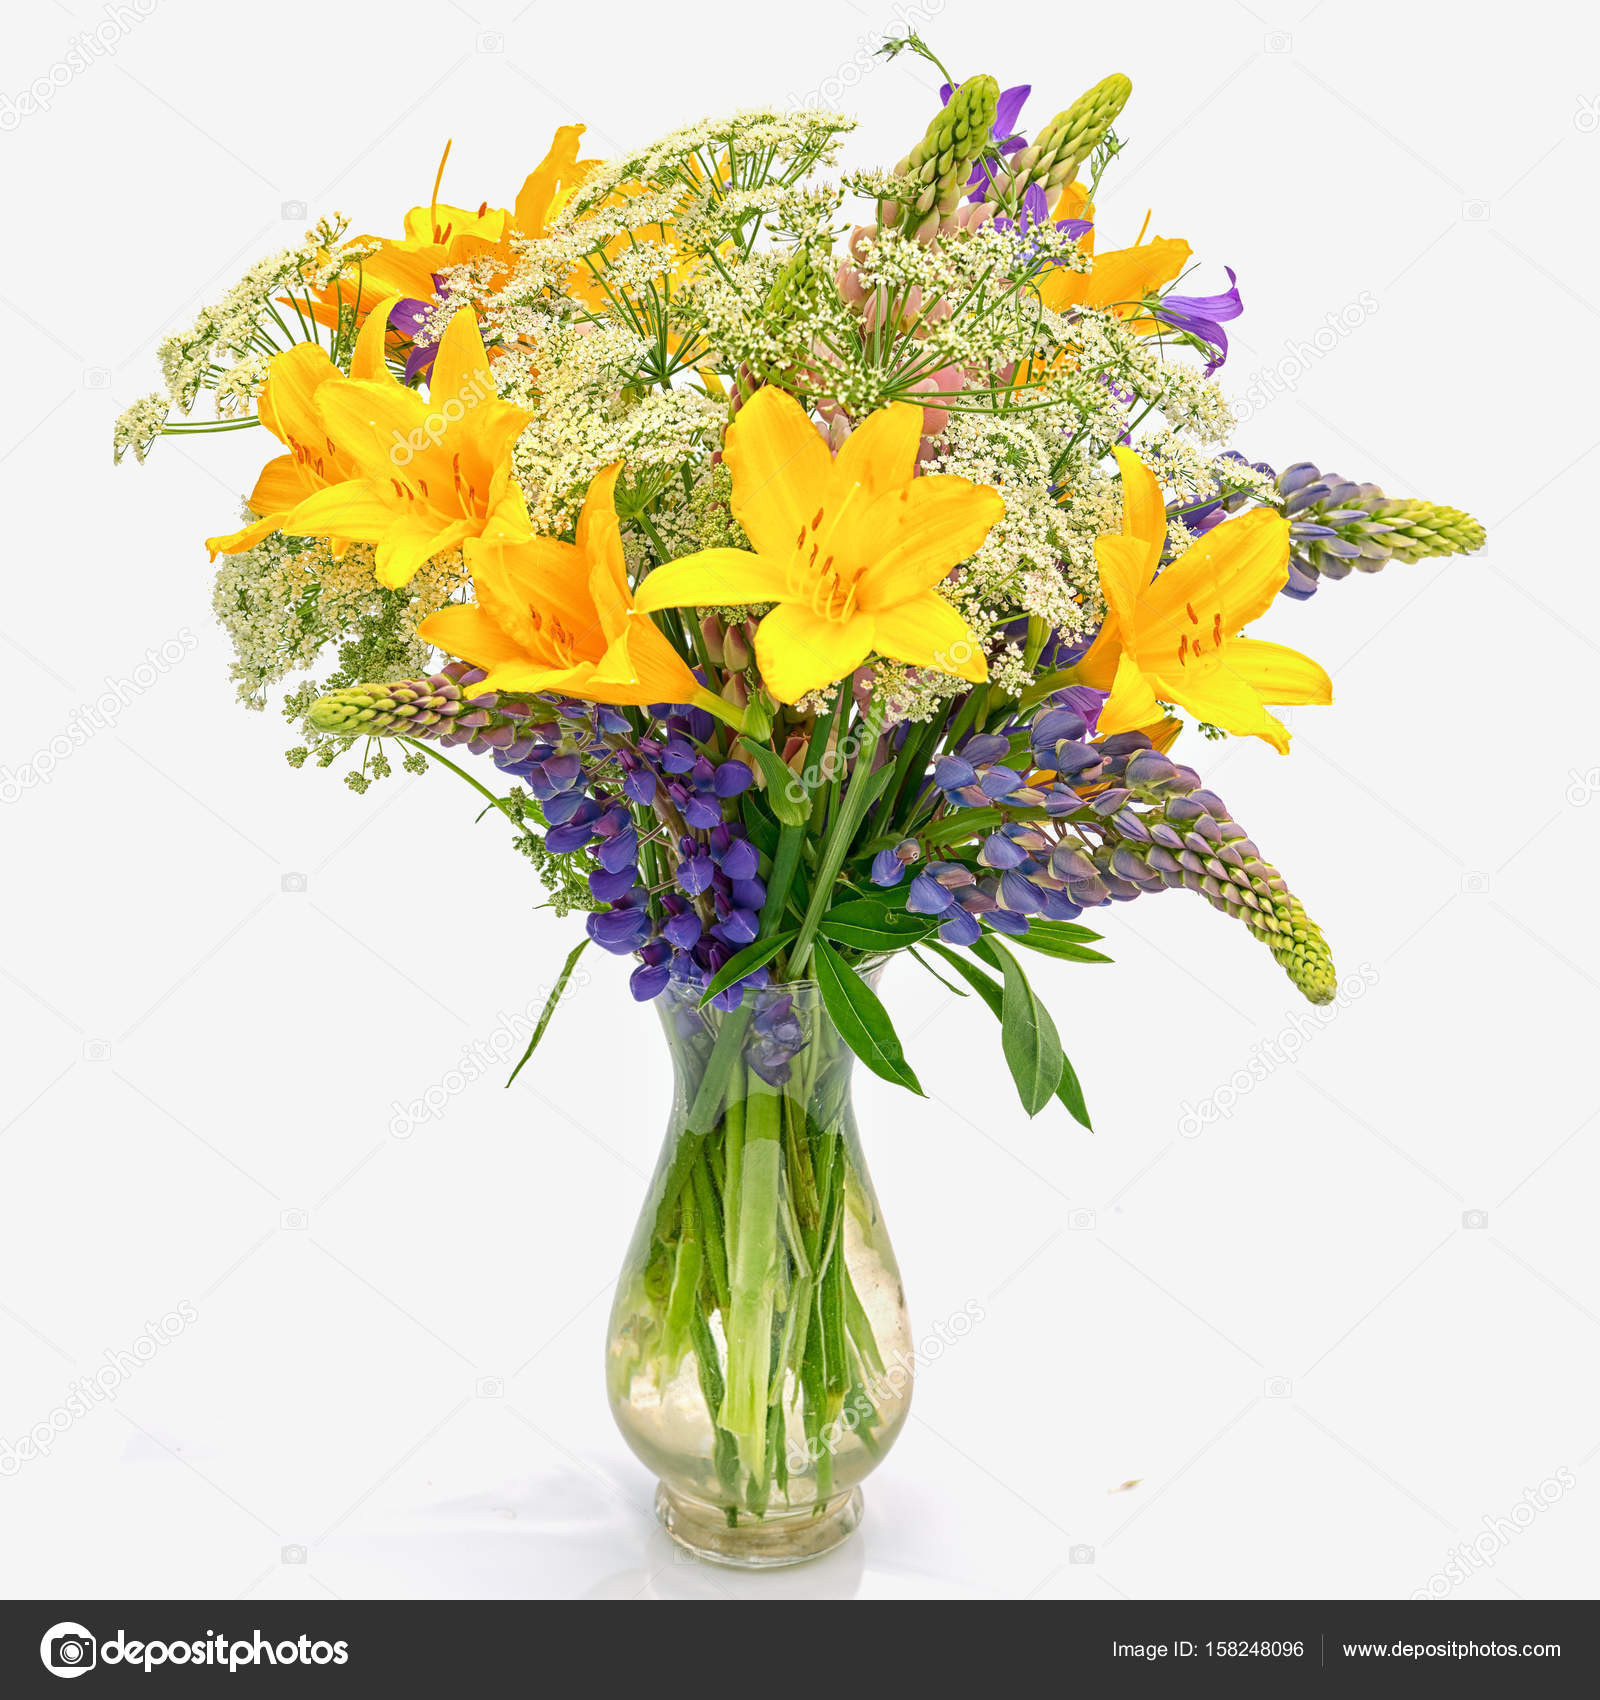 25 Spectacular Ceramic Cowboy Boot Vase 2024 free download ceramic cowboy boot vase of yellow flower vase photos design house flowers beautiful 4 home regarding yellow flower vase gallery bouquet od wild flowers achillea millefolium day lily and lup